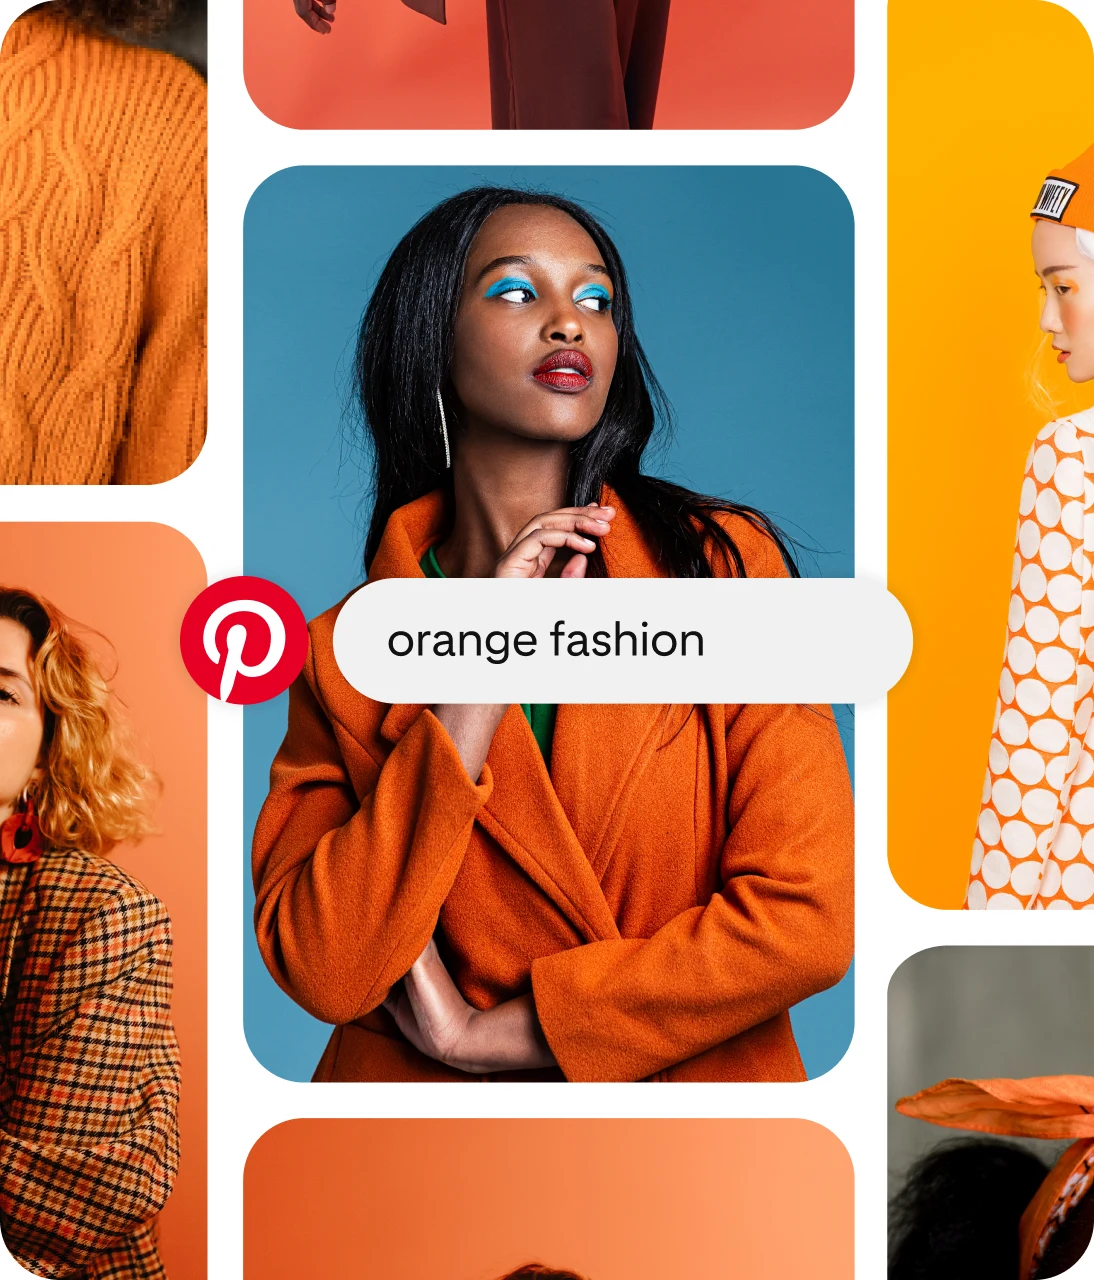 Pinterest search bar UI  containing words orange fashion overlaid on pin grid of orange fashion outfits, with woman wearing orange coat in center pins. 